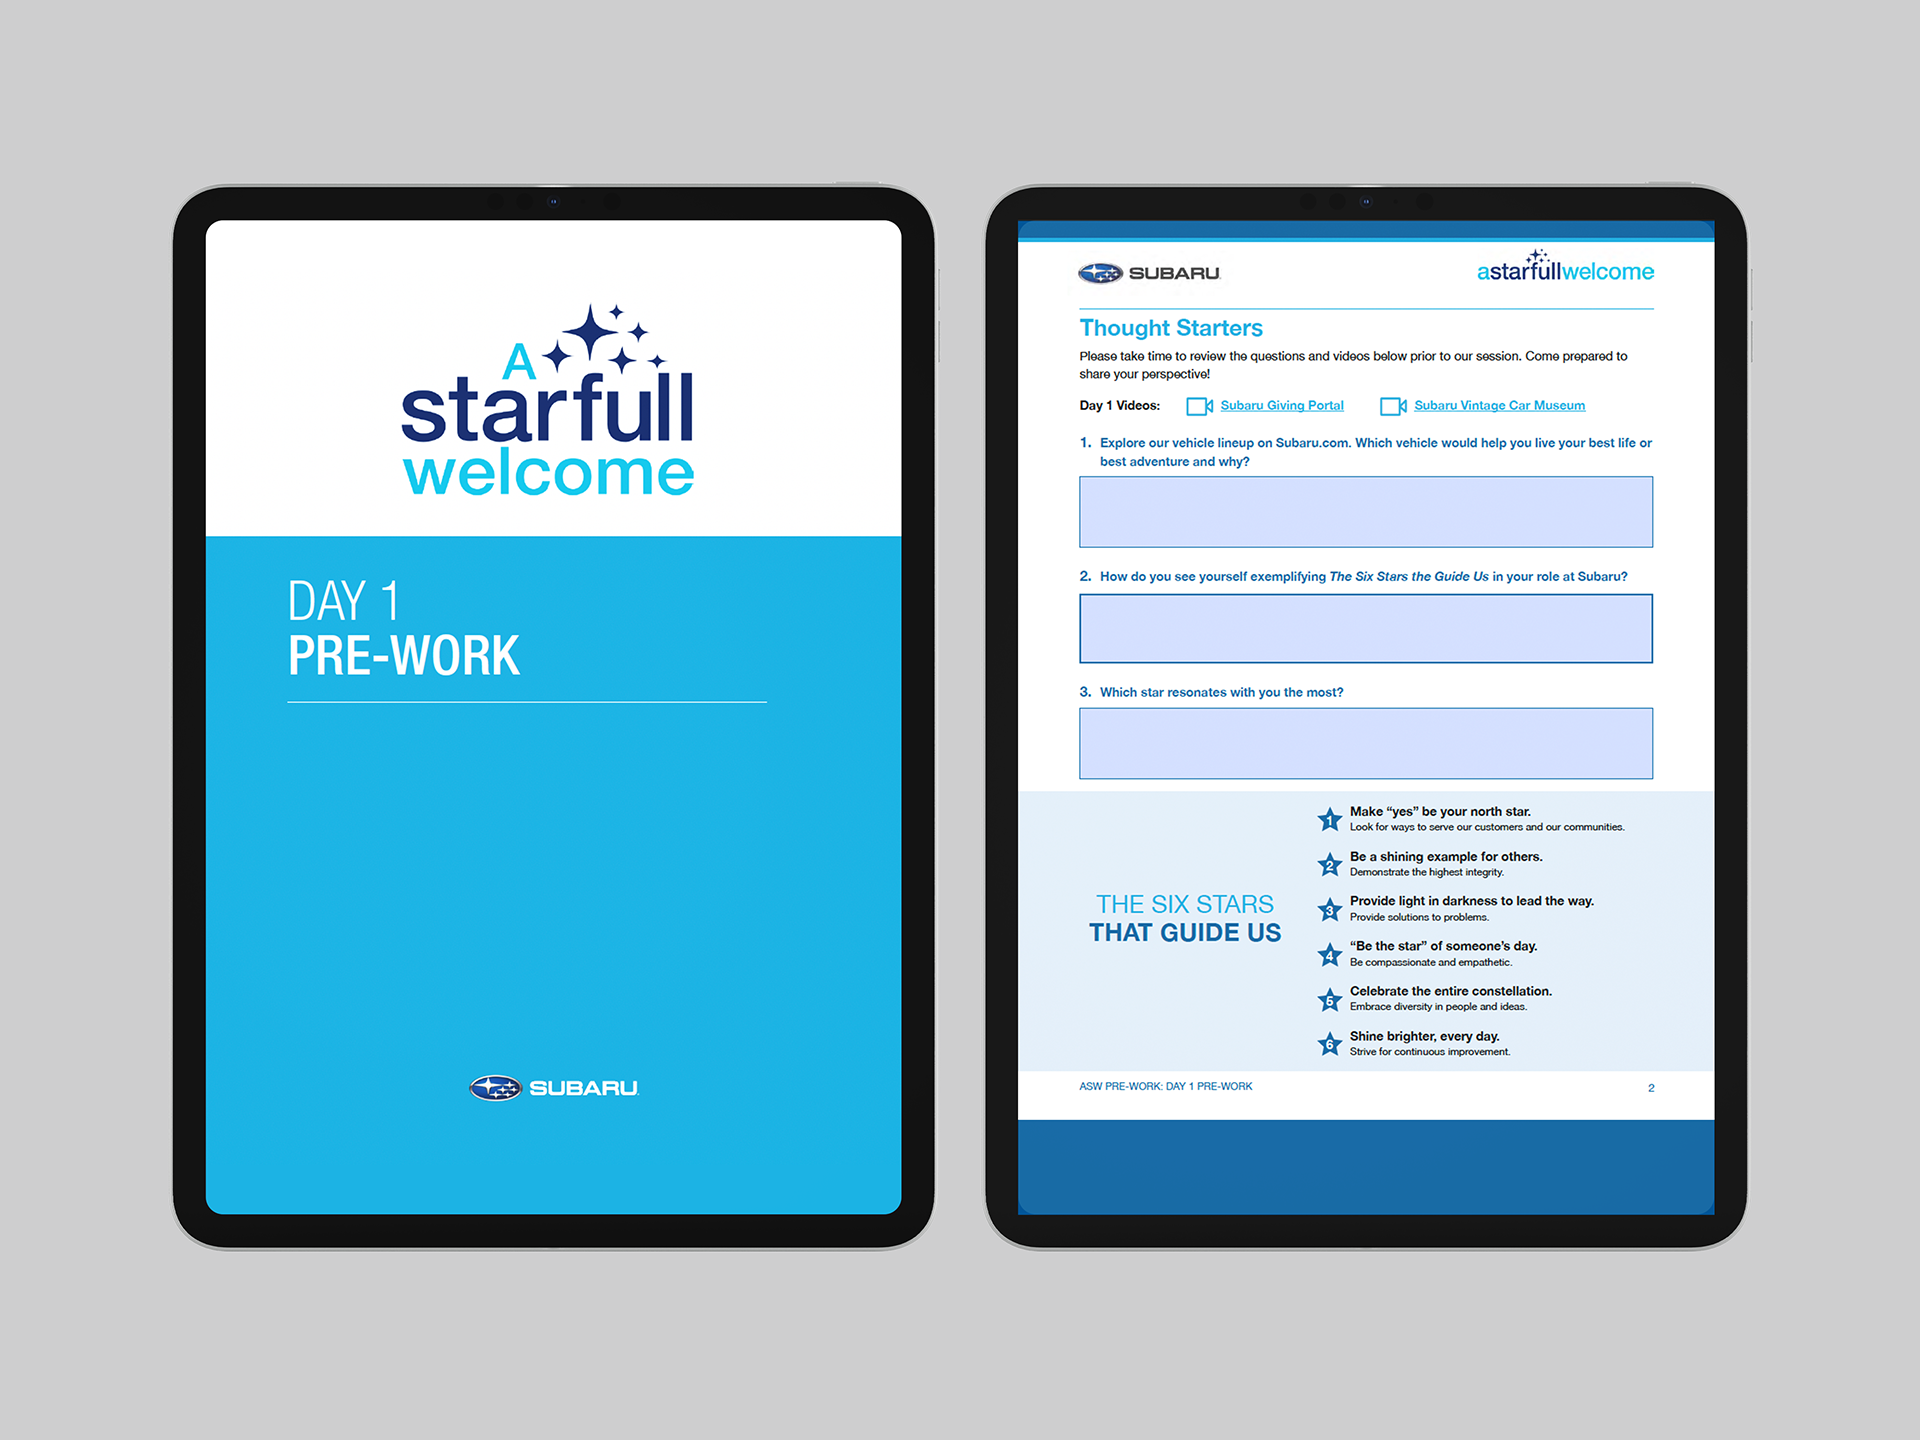 A Starfull Welcome Onboarding Program